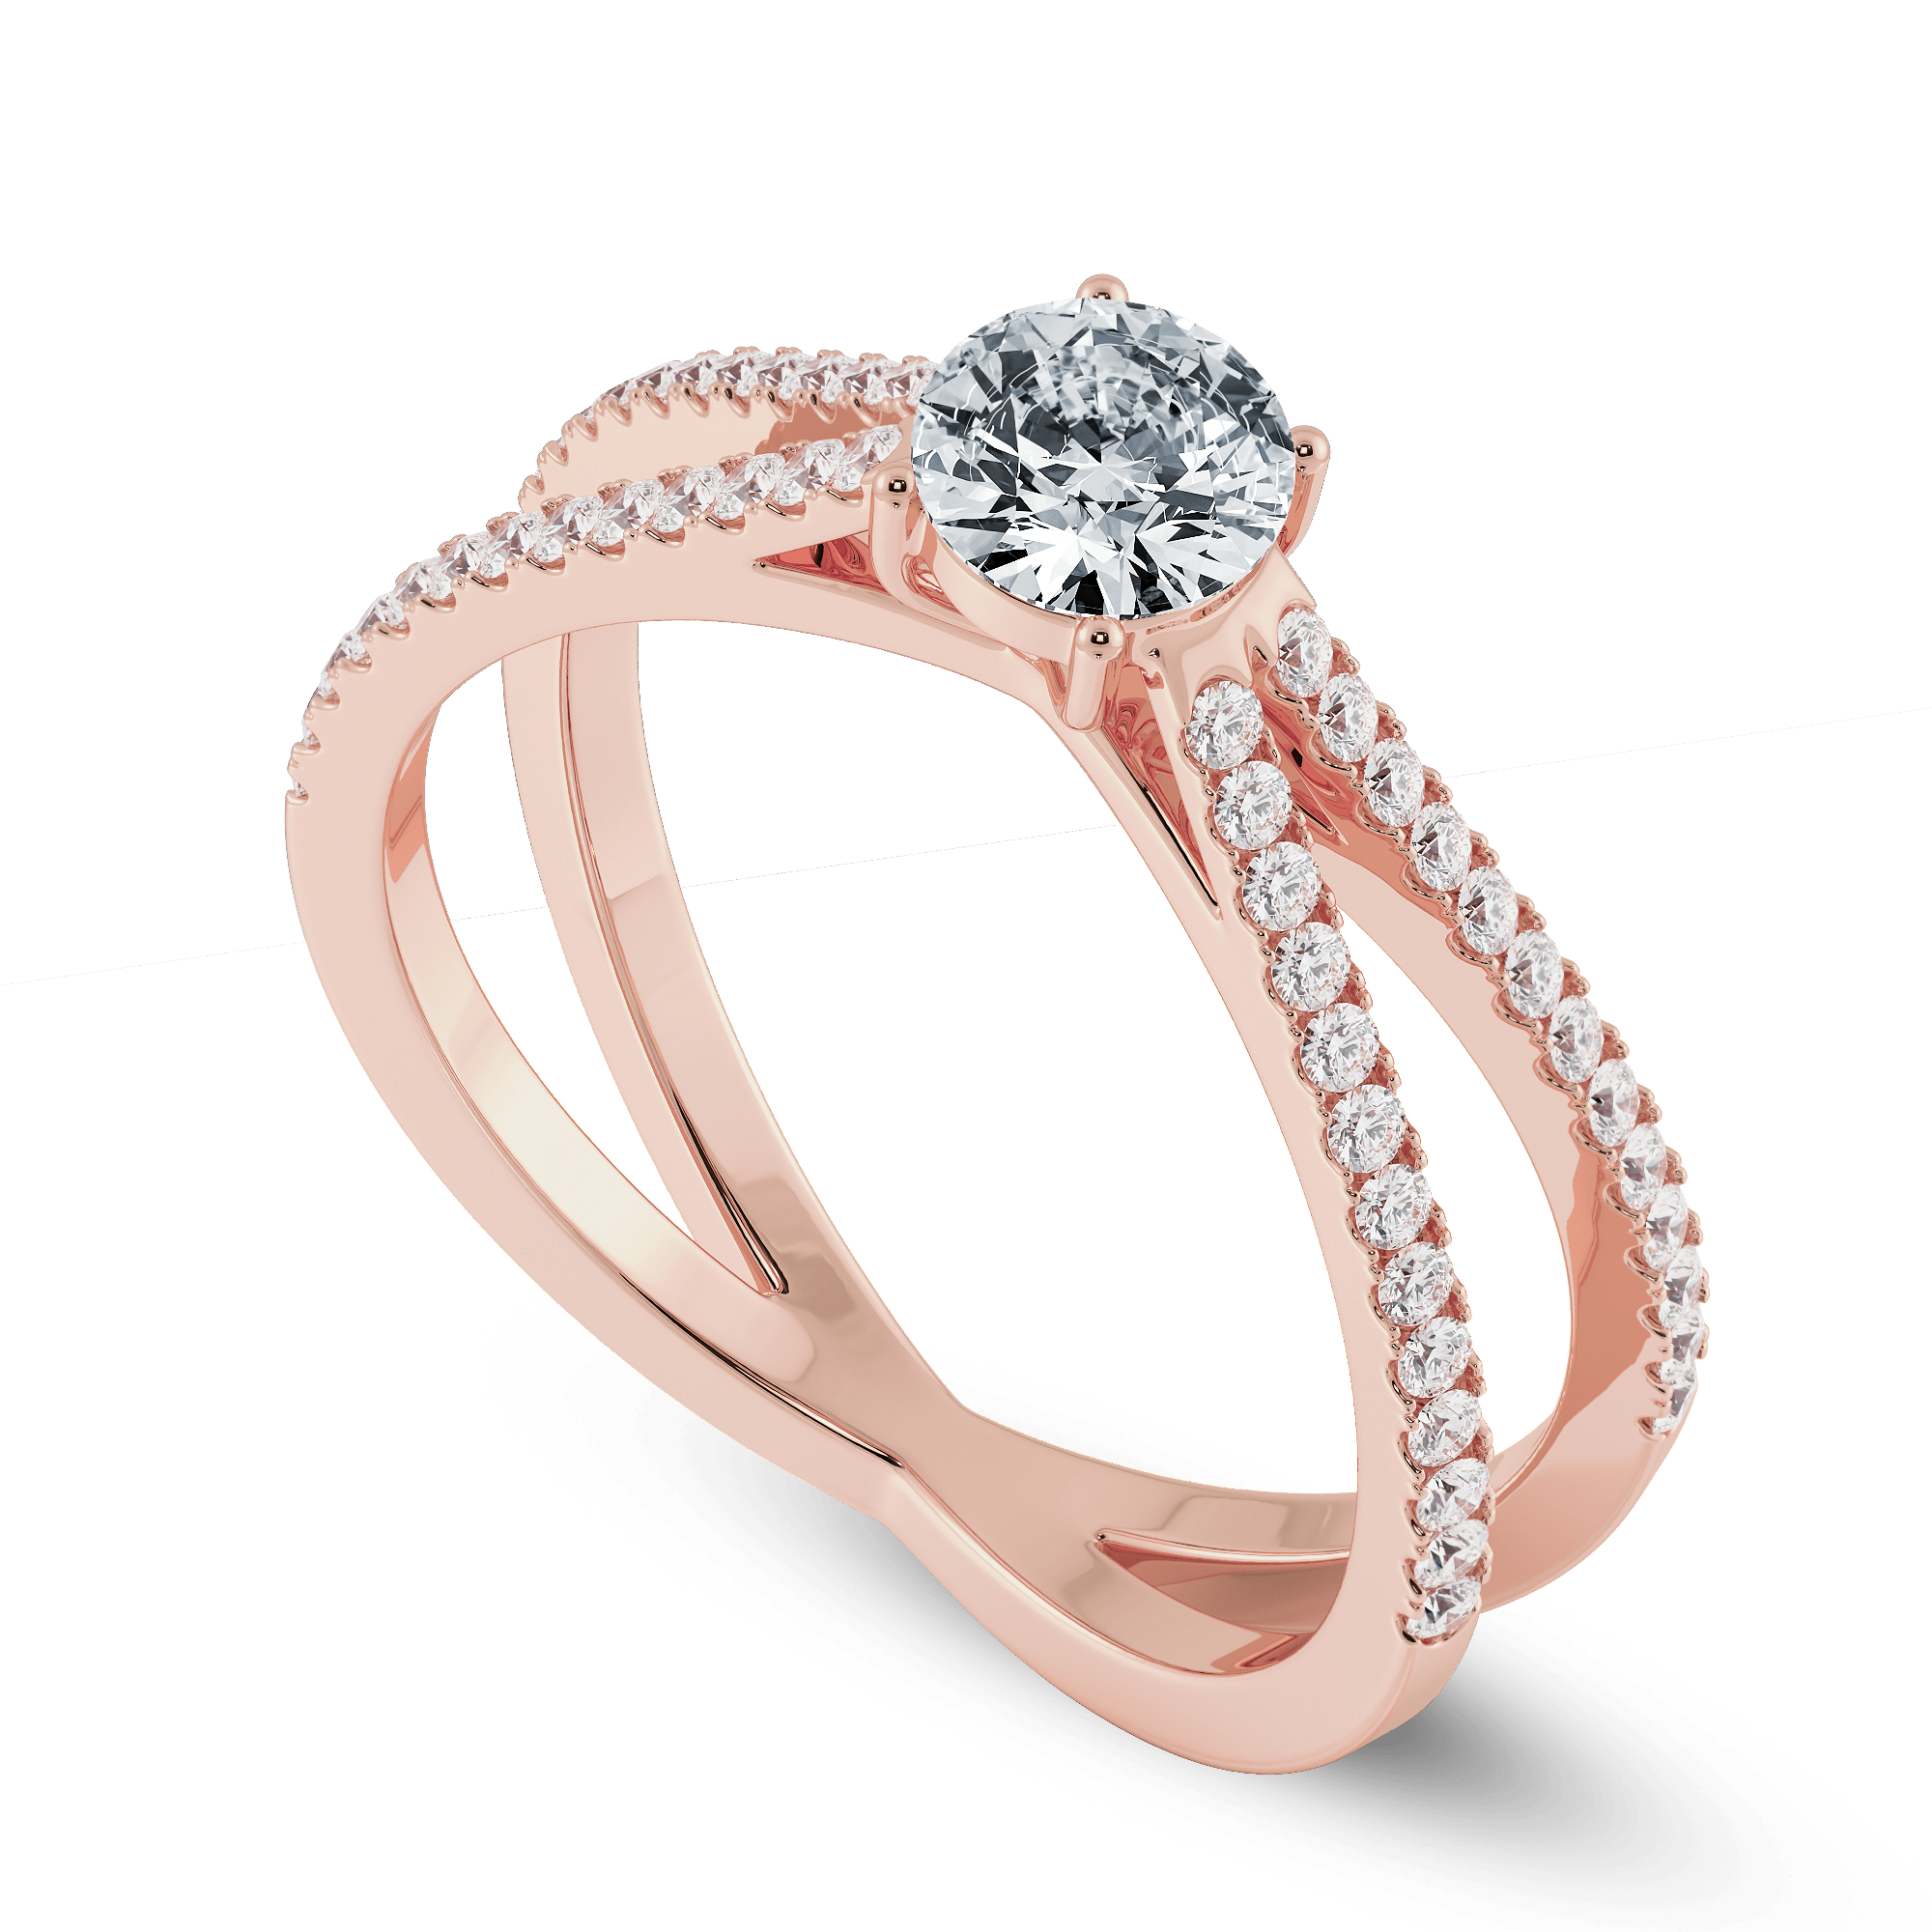 Surreal Classy Diamond Ring in Rose Gold